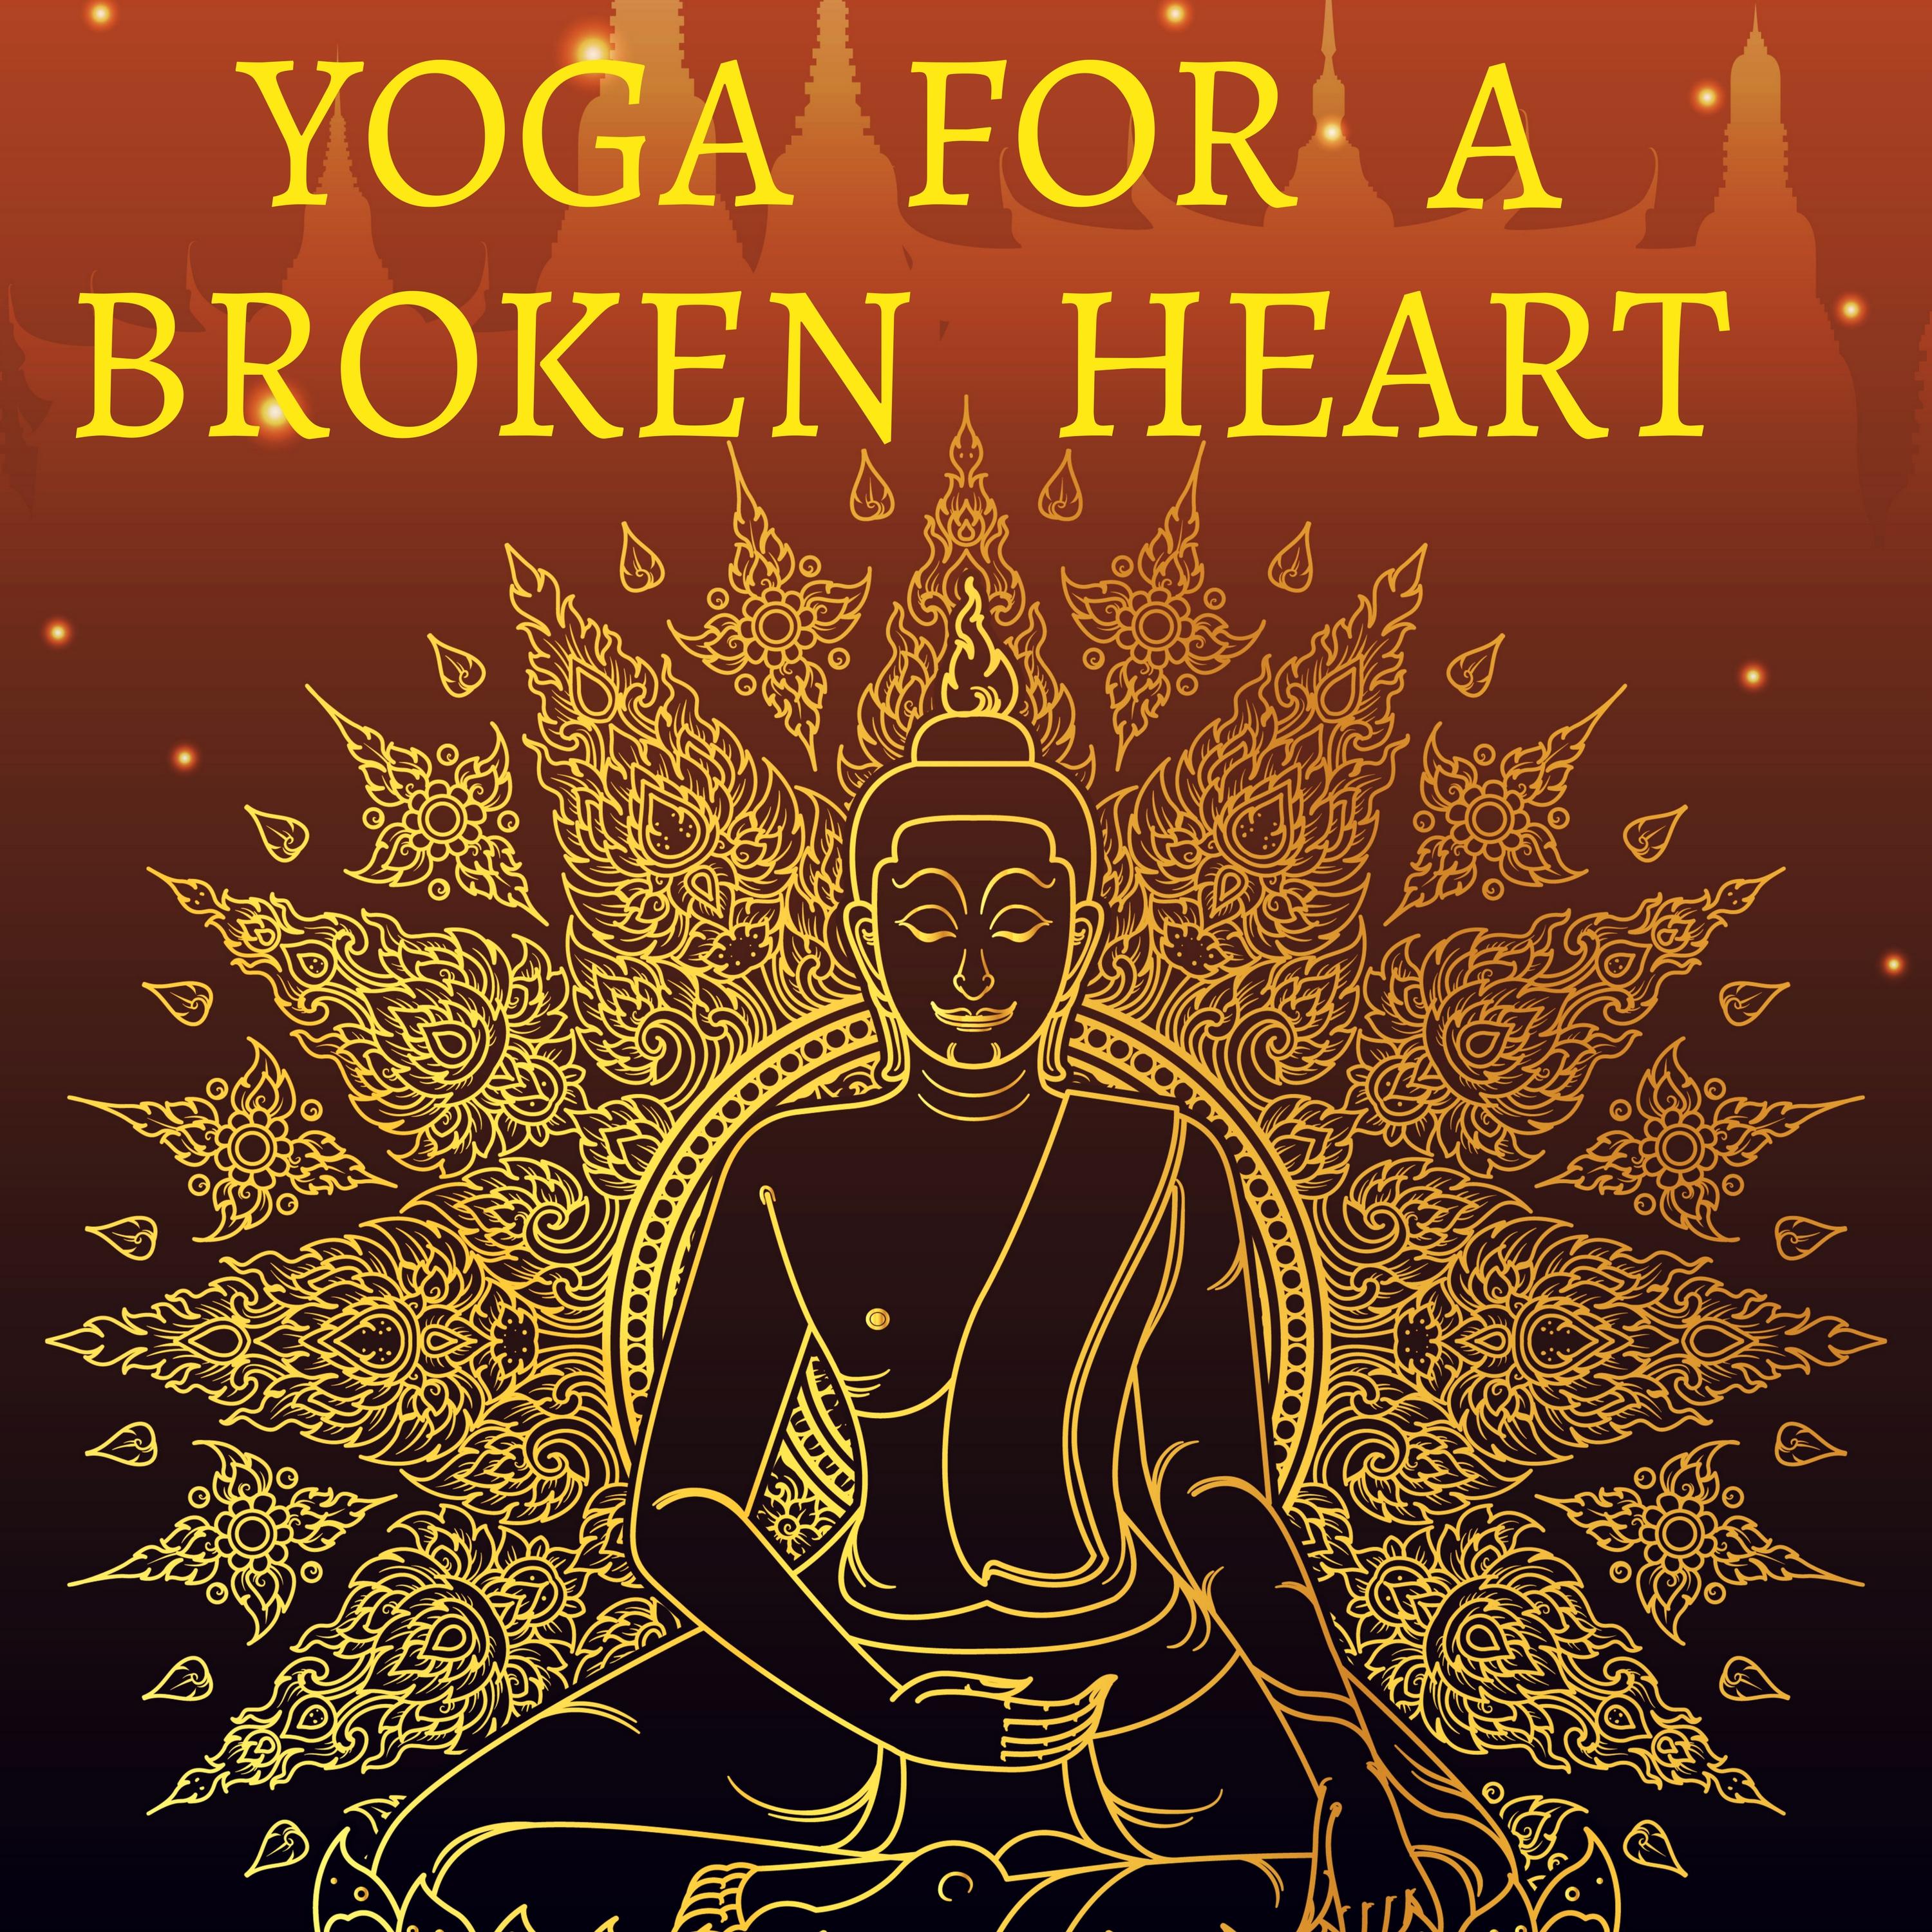 Yoga for a Broken Heart - Meditation Music to Overcome Sadness, Mindfulness Music, Love Songs